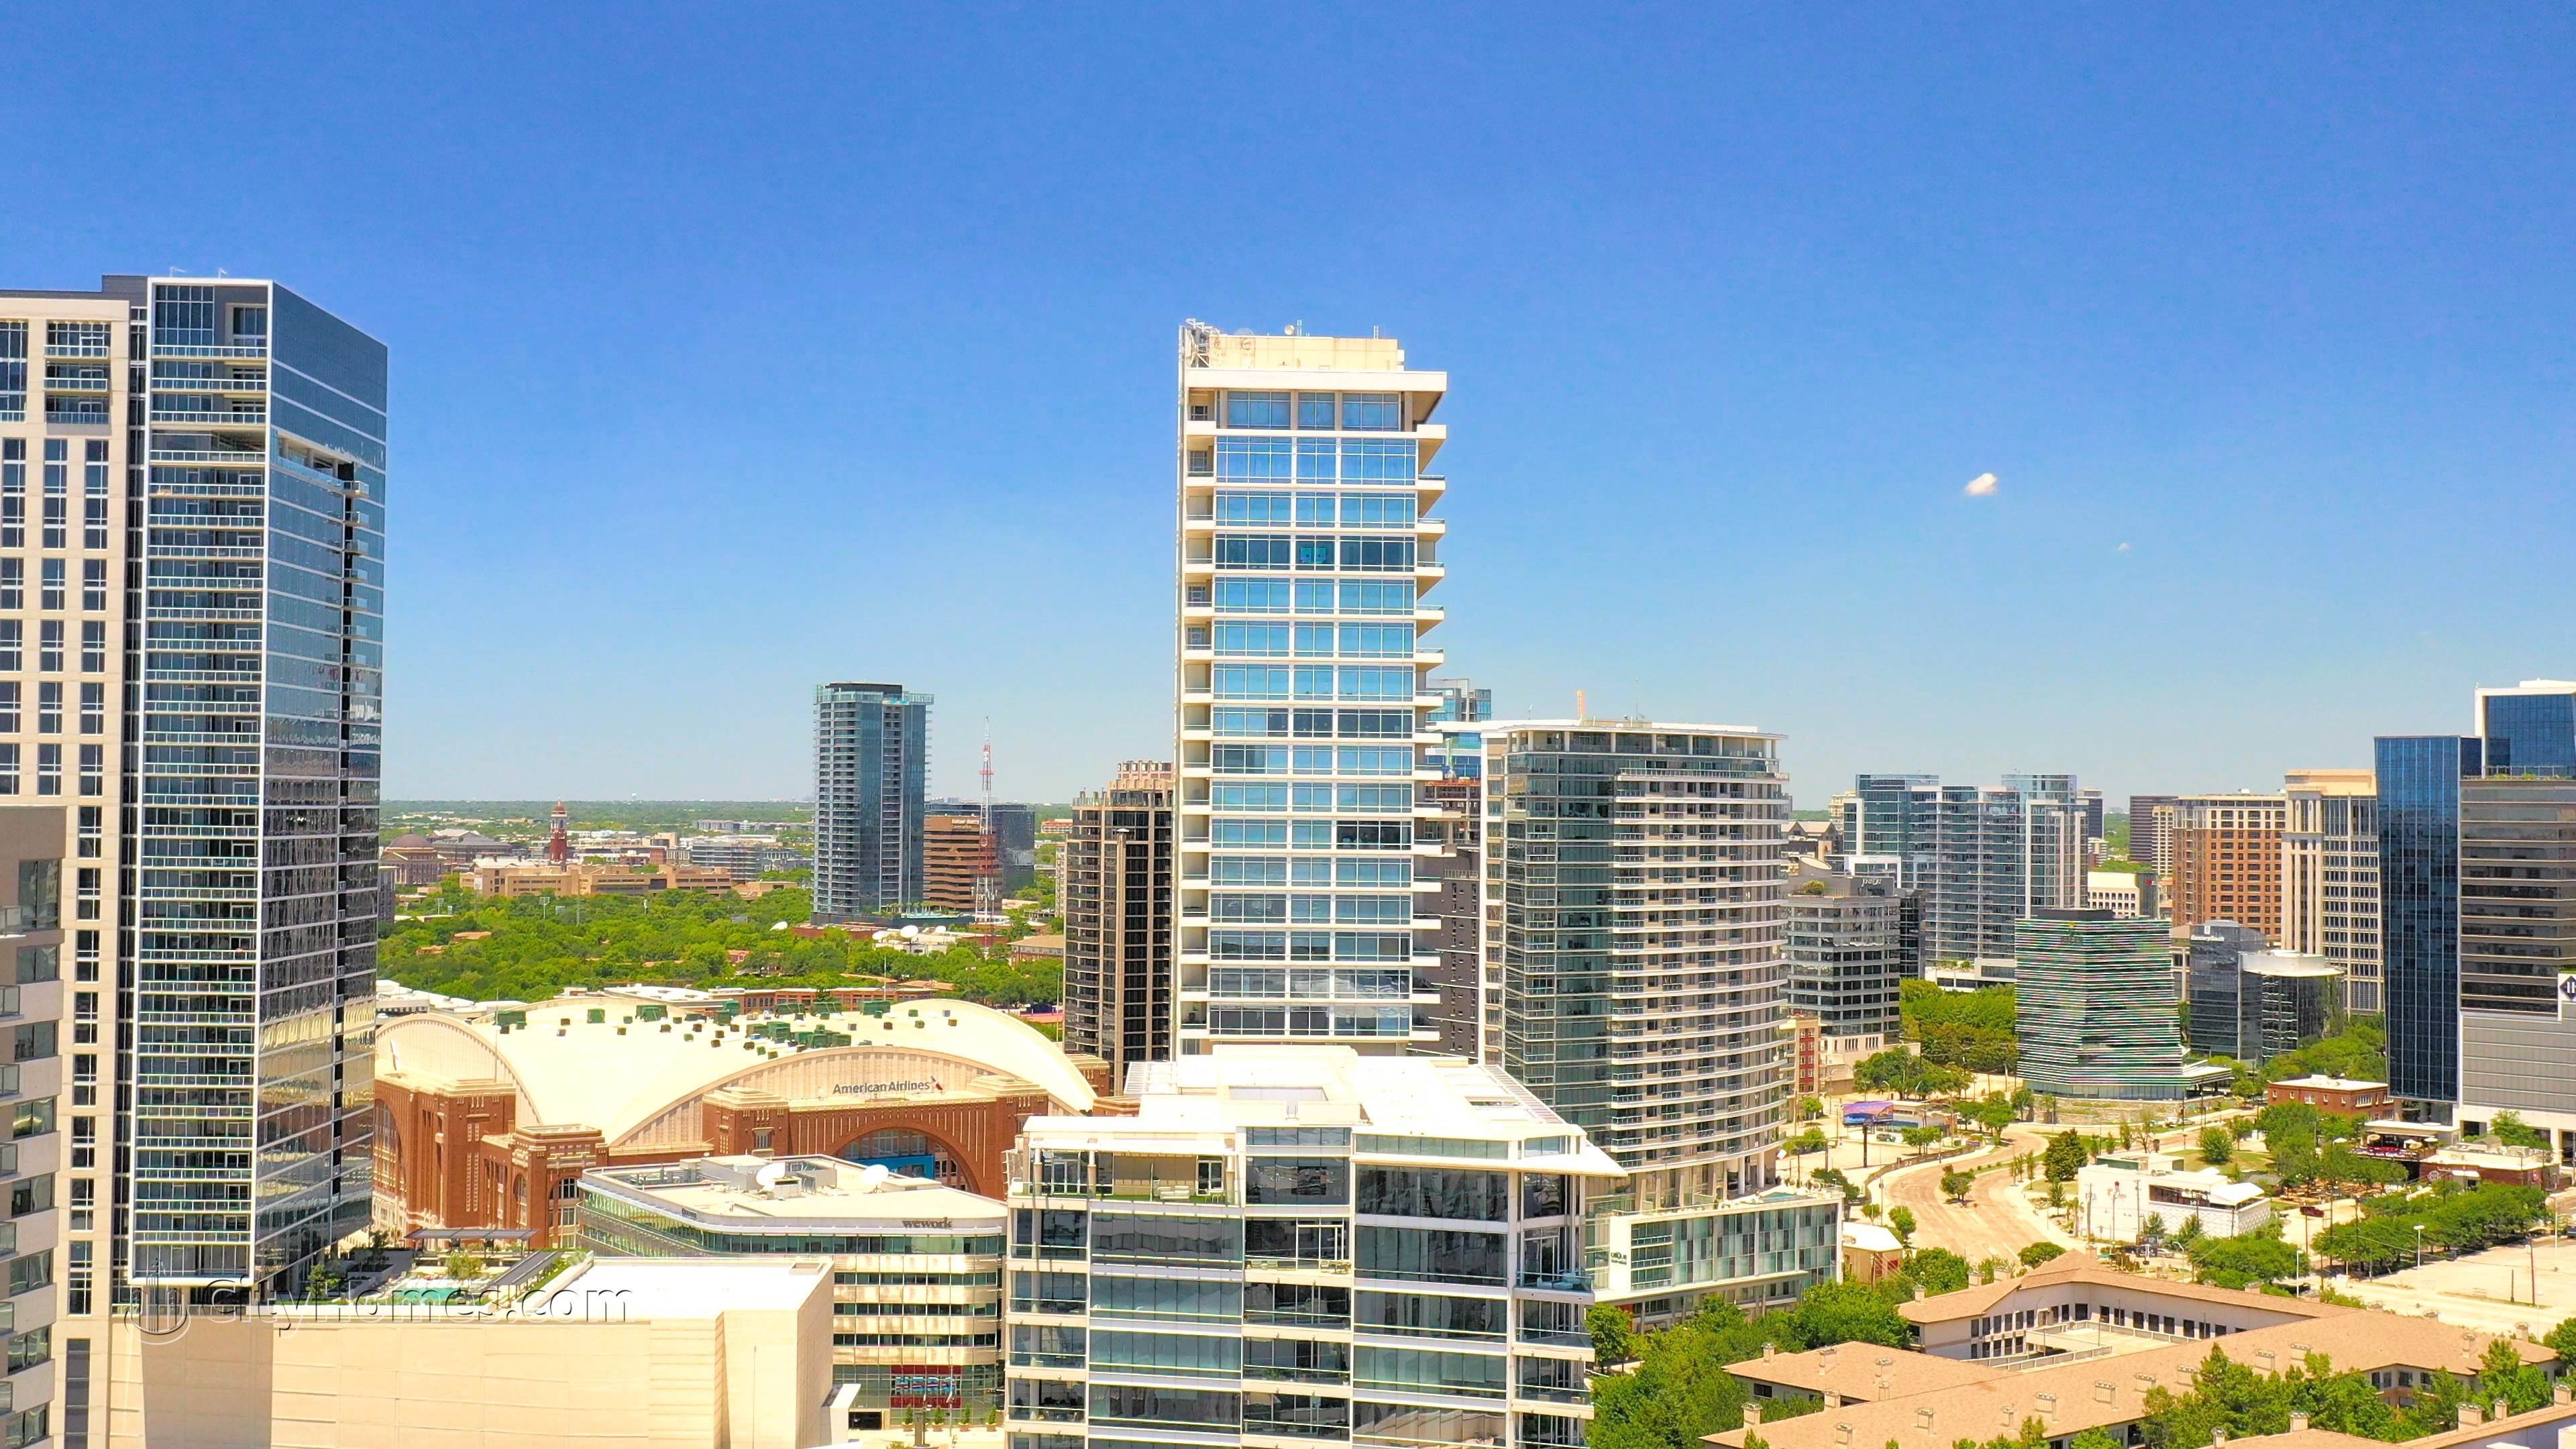 3. Stoneleigh Residences building at 2300 Wolf Street, Uptown Dallas, Dallas, TX 75201